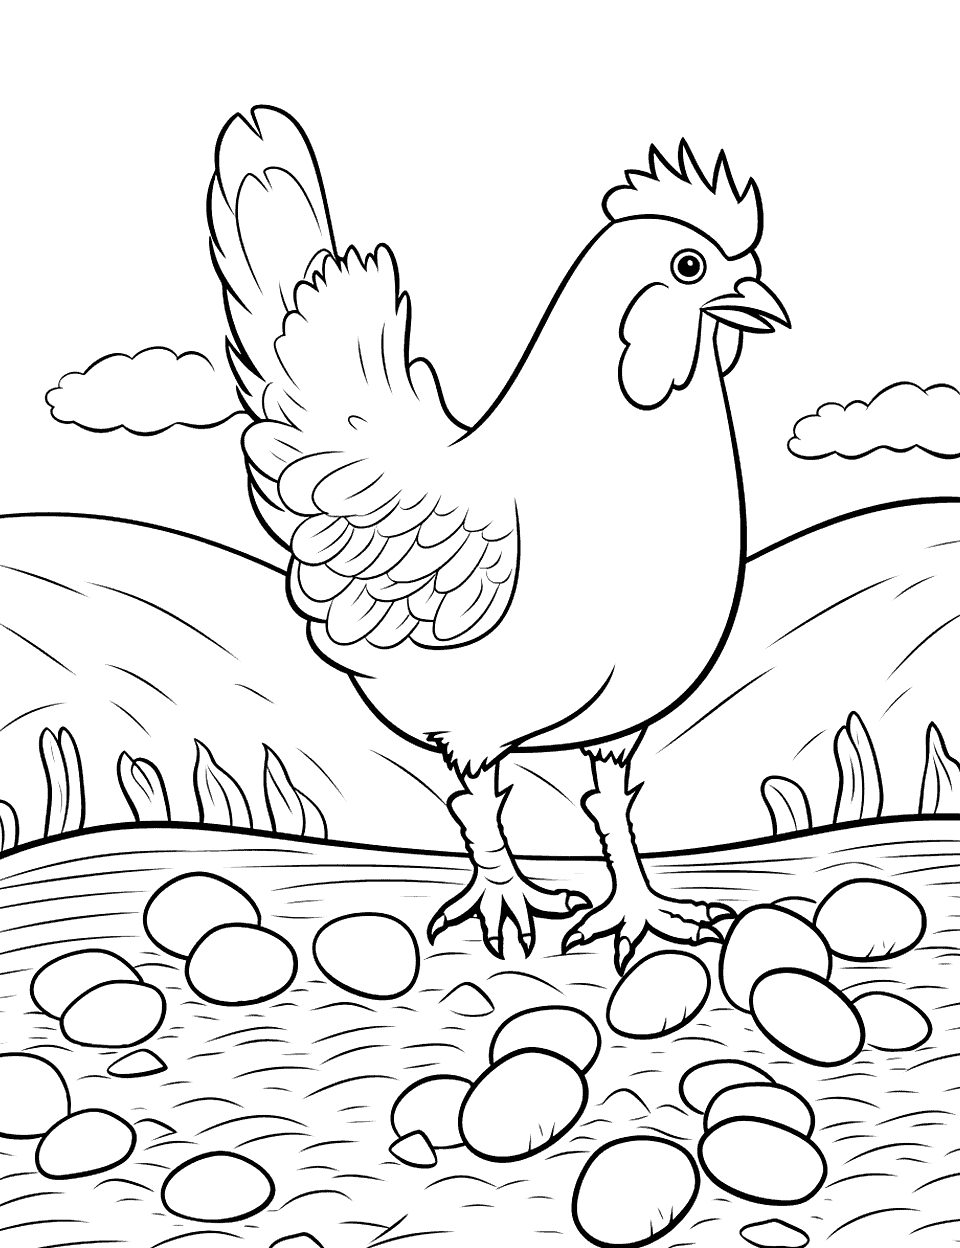 Chicken and Grains Farm Coloring Page - A chicken walking around looking for grains on the ground.